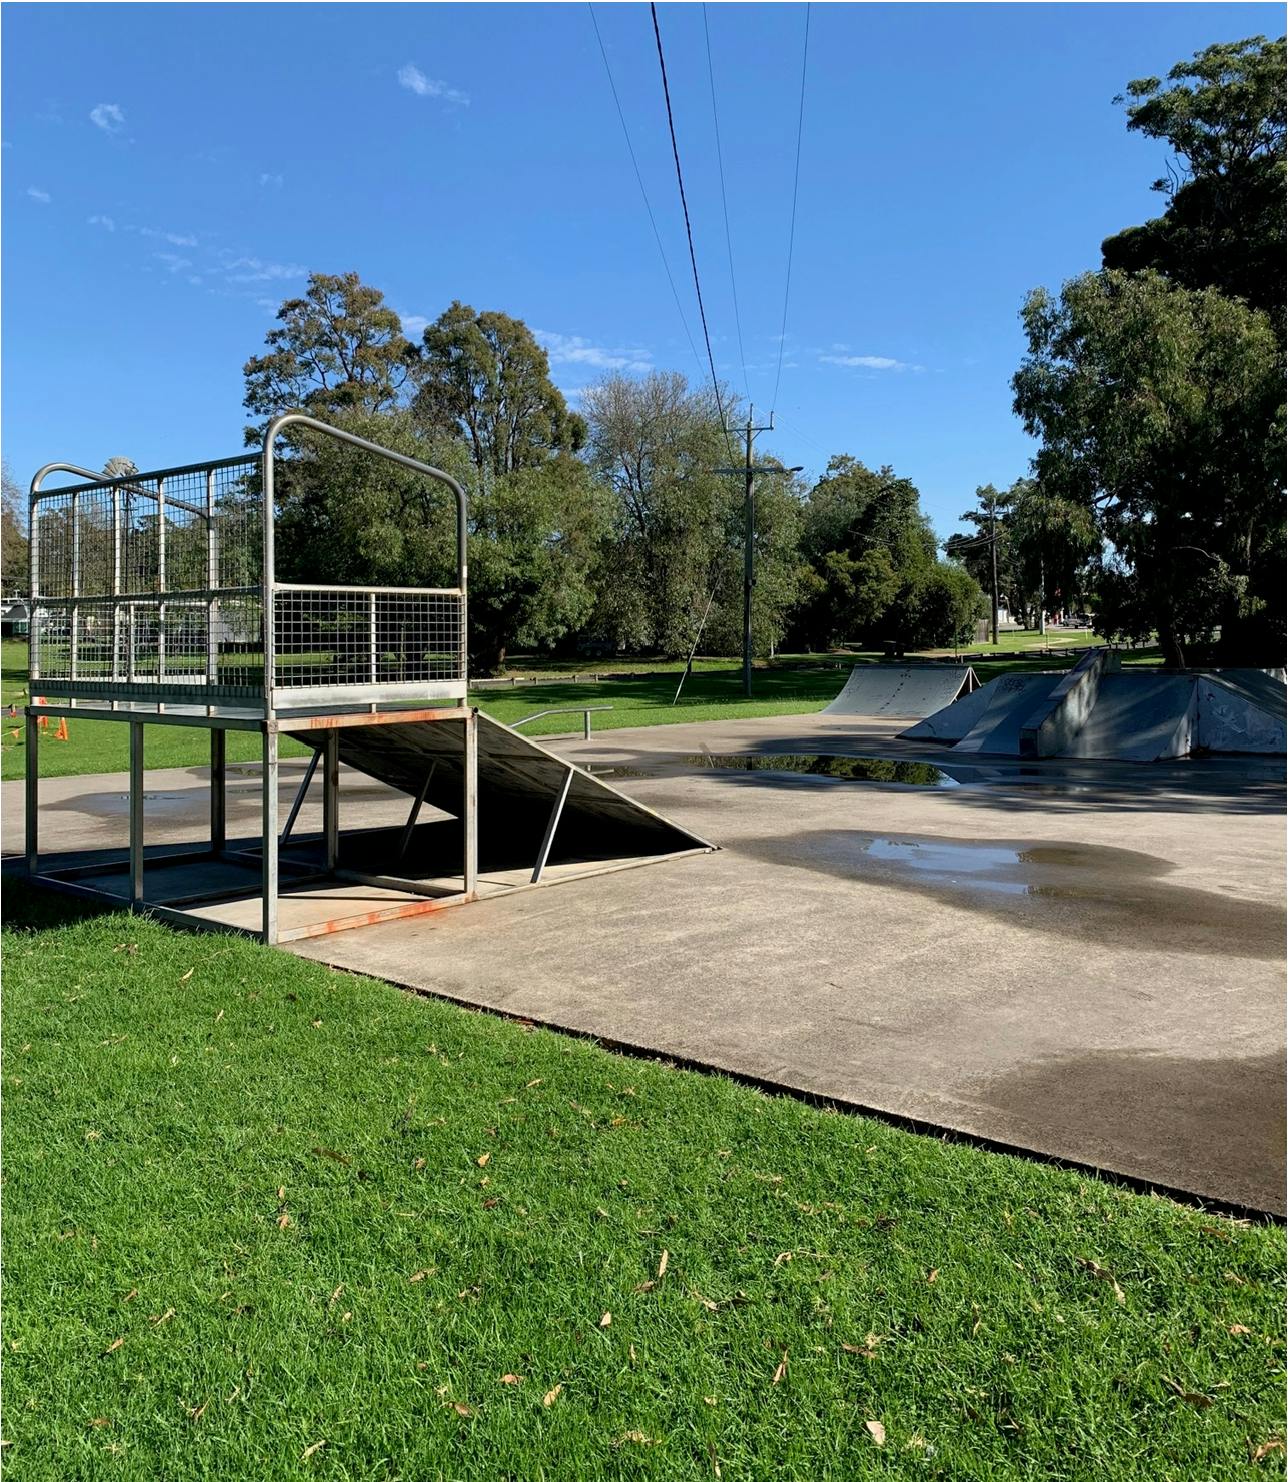 10/8/2021 - Existing Mallacoota Skatepark Ramp 1 different view